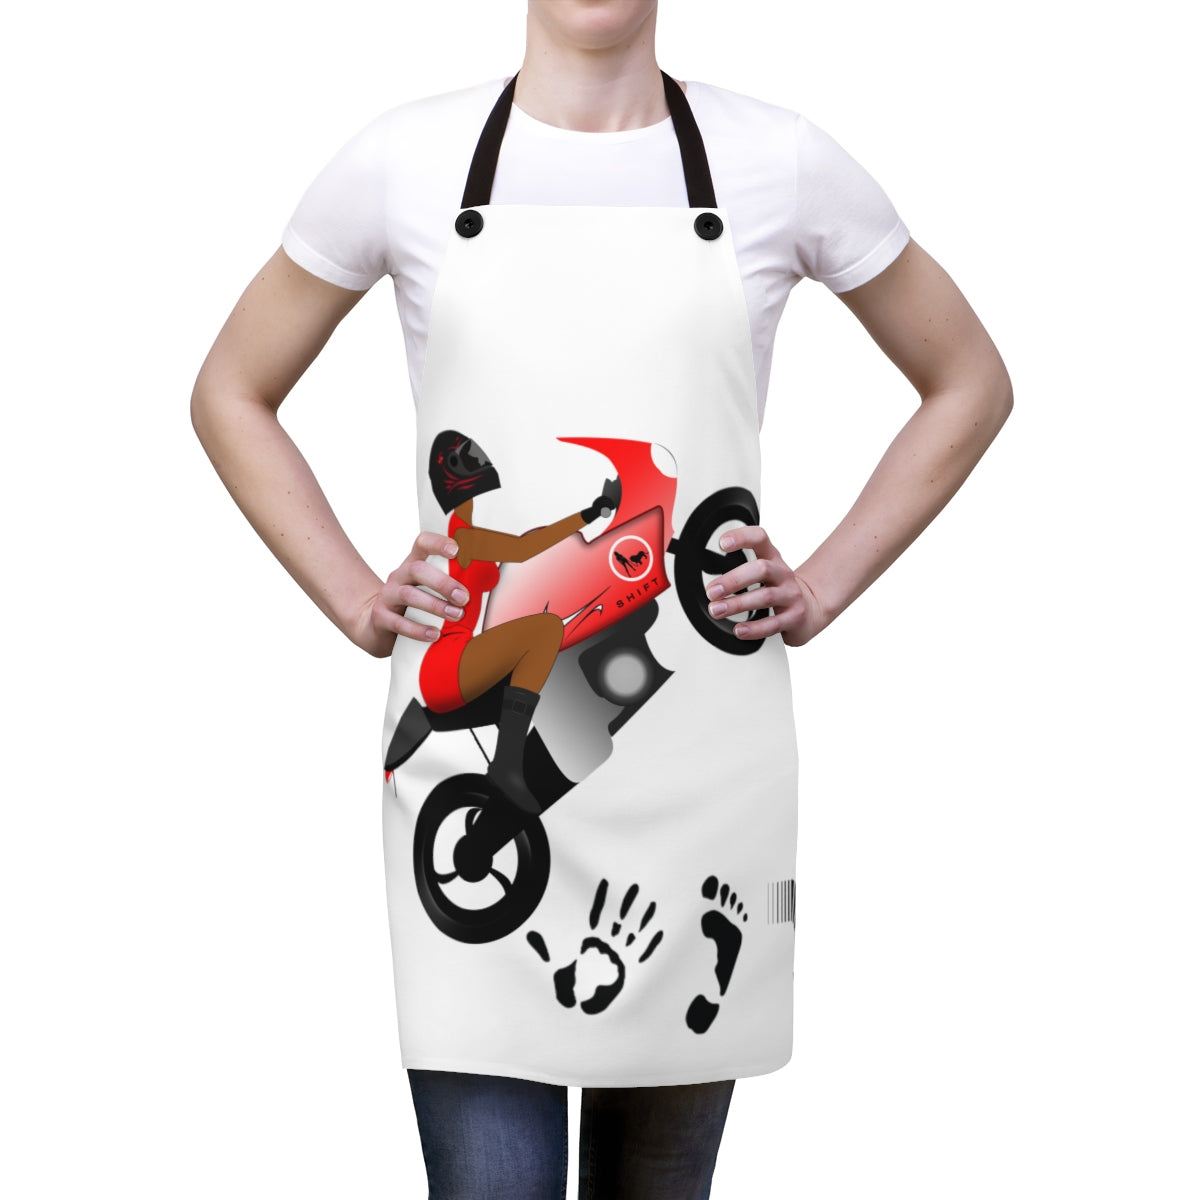 Five Toes Down Lady Rider Apron